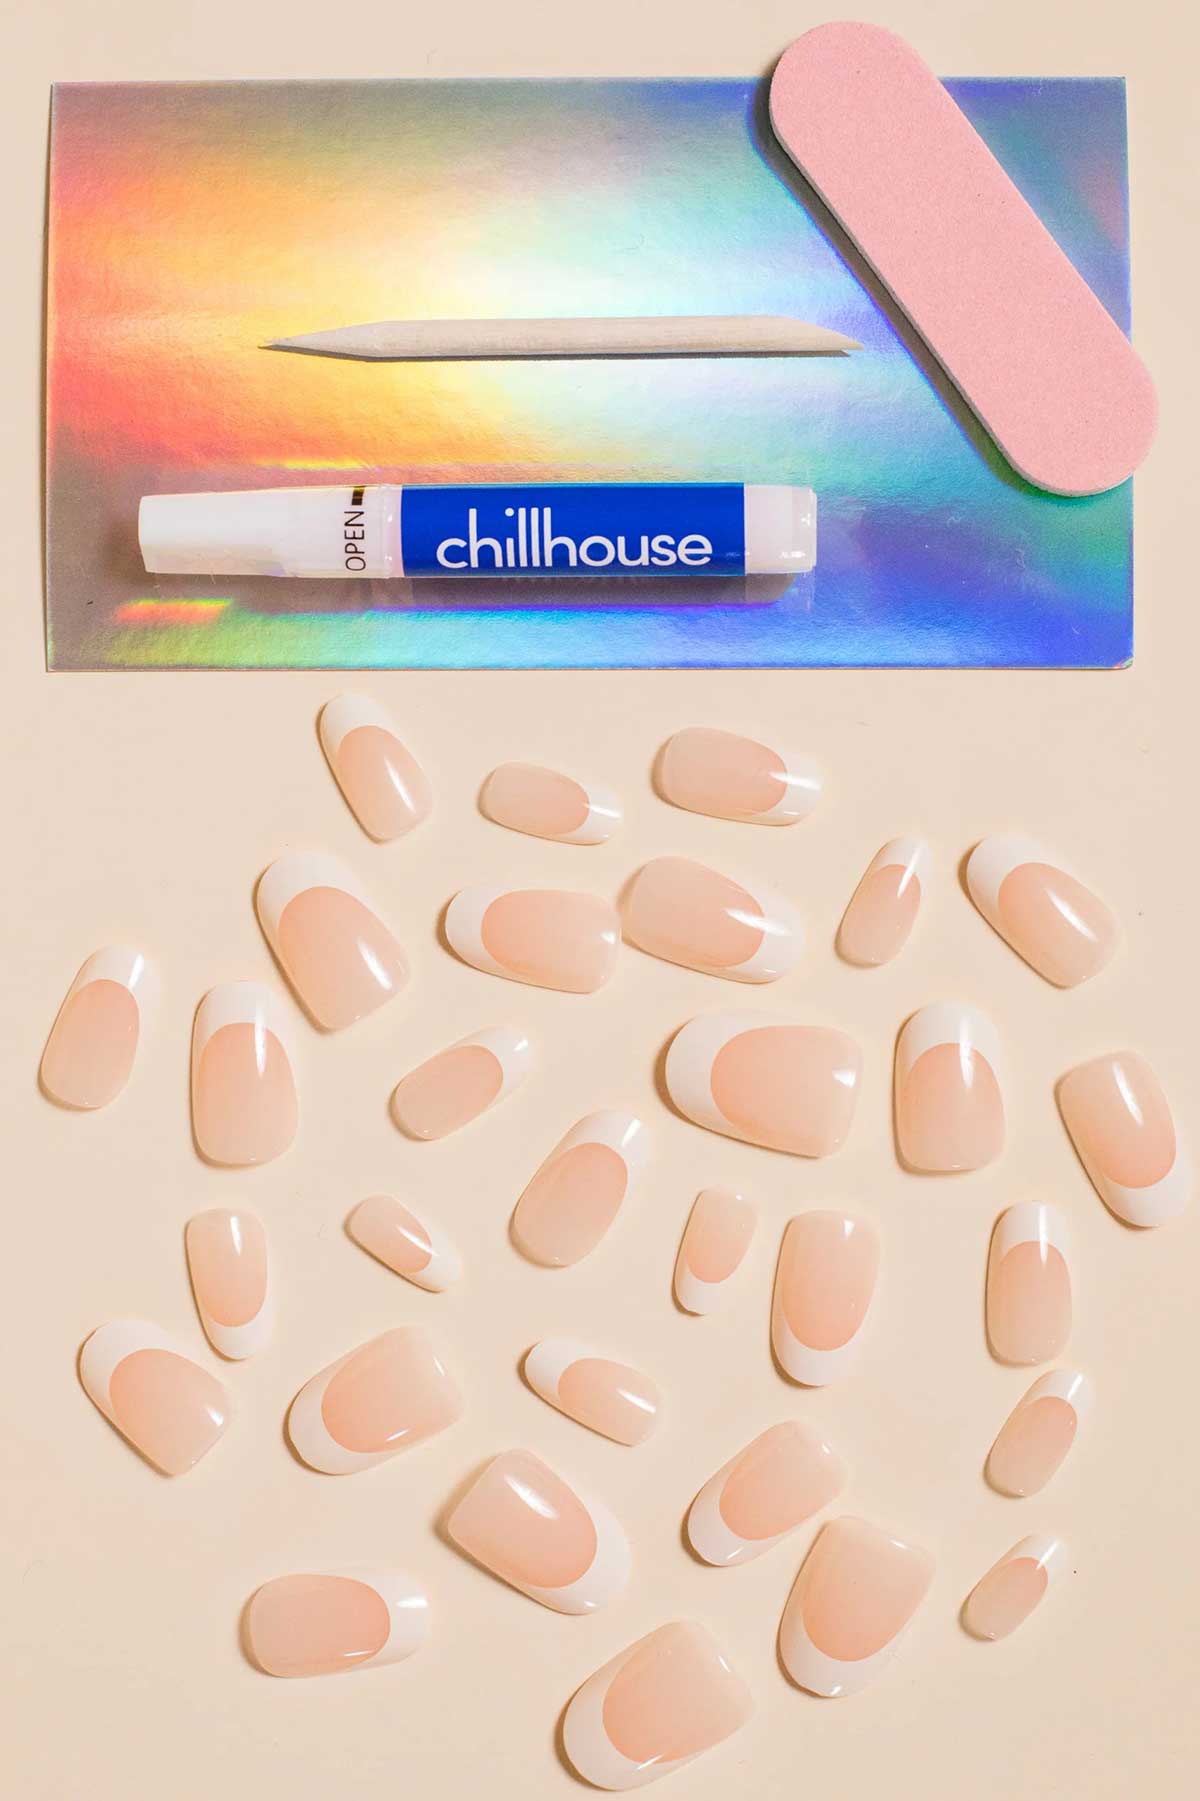 Chillhouse - Chill Tips - French Twist - Contents